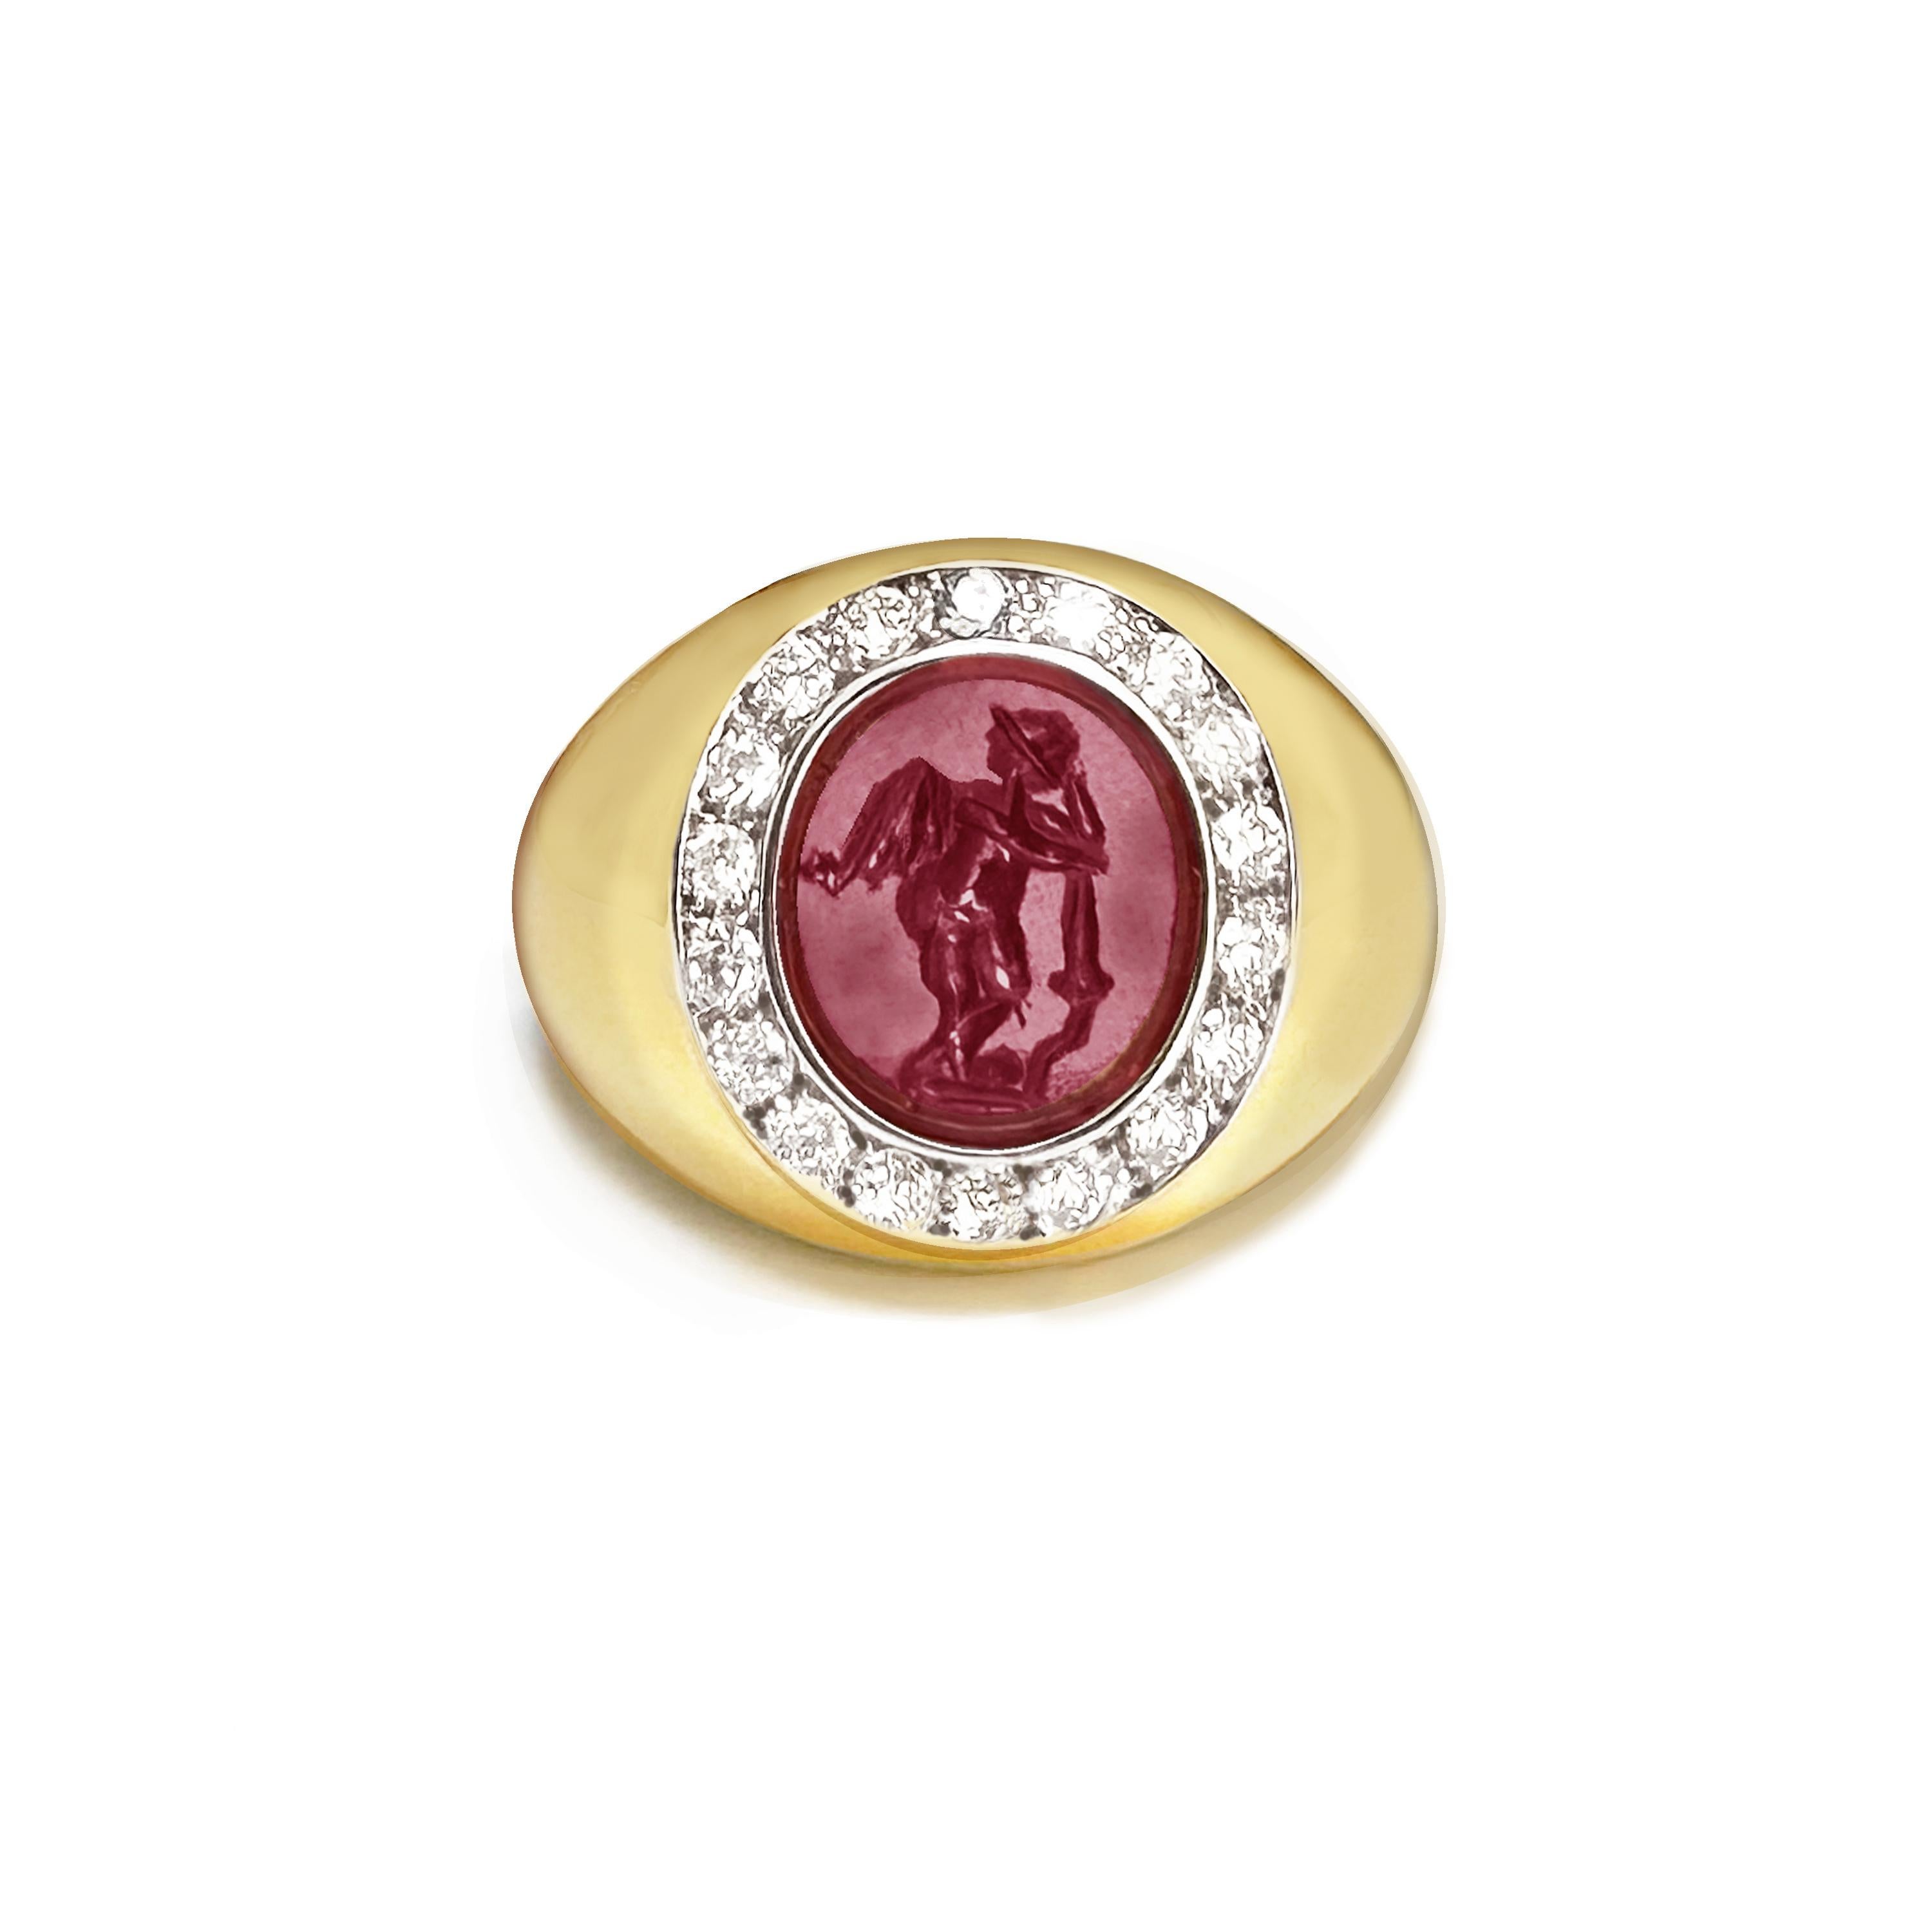 This 18 Kt gold ring has been set with an authentic Roman intaglio, on garnet, which depicts a winged Cupid leaning on a torch. The central stone is surrounded by 18 diamonds for a total of 0.70 Cts.
The Romans called him Cupid, from the Latin word